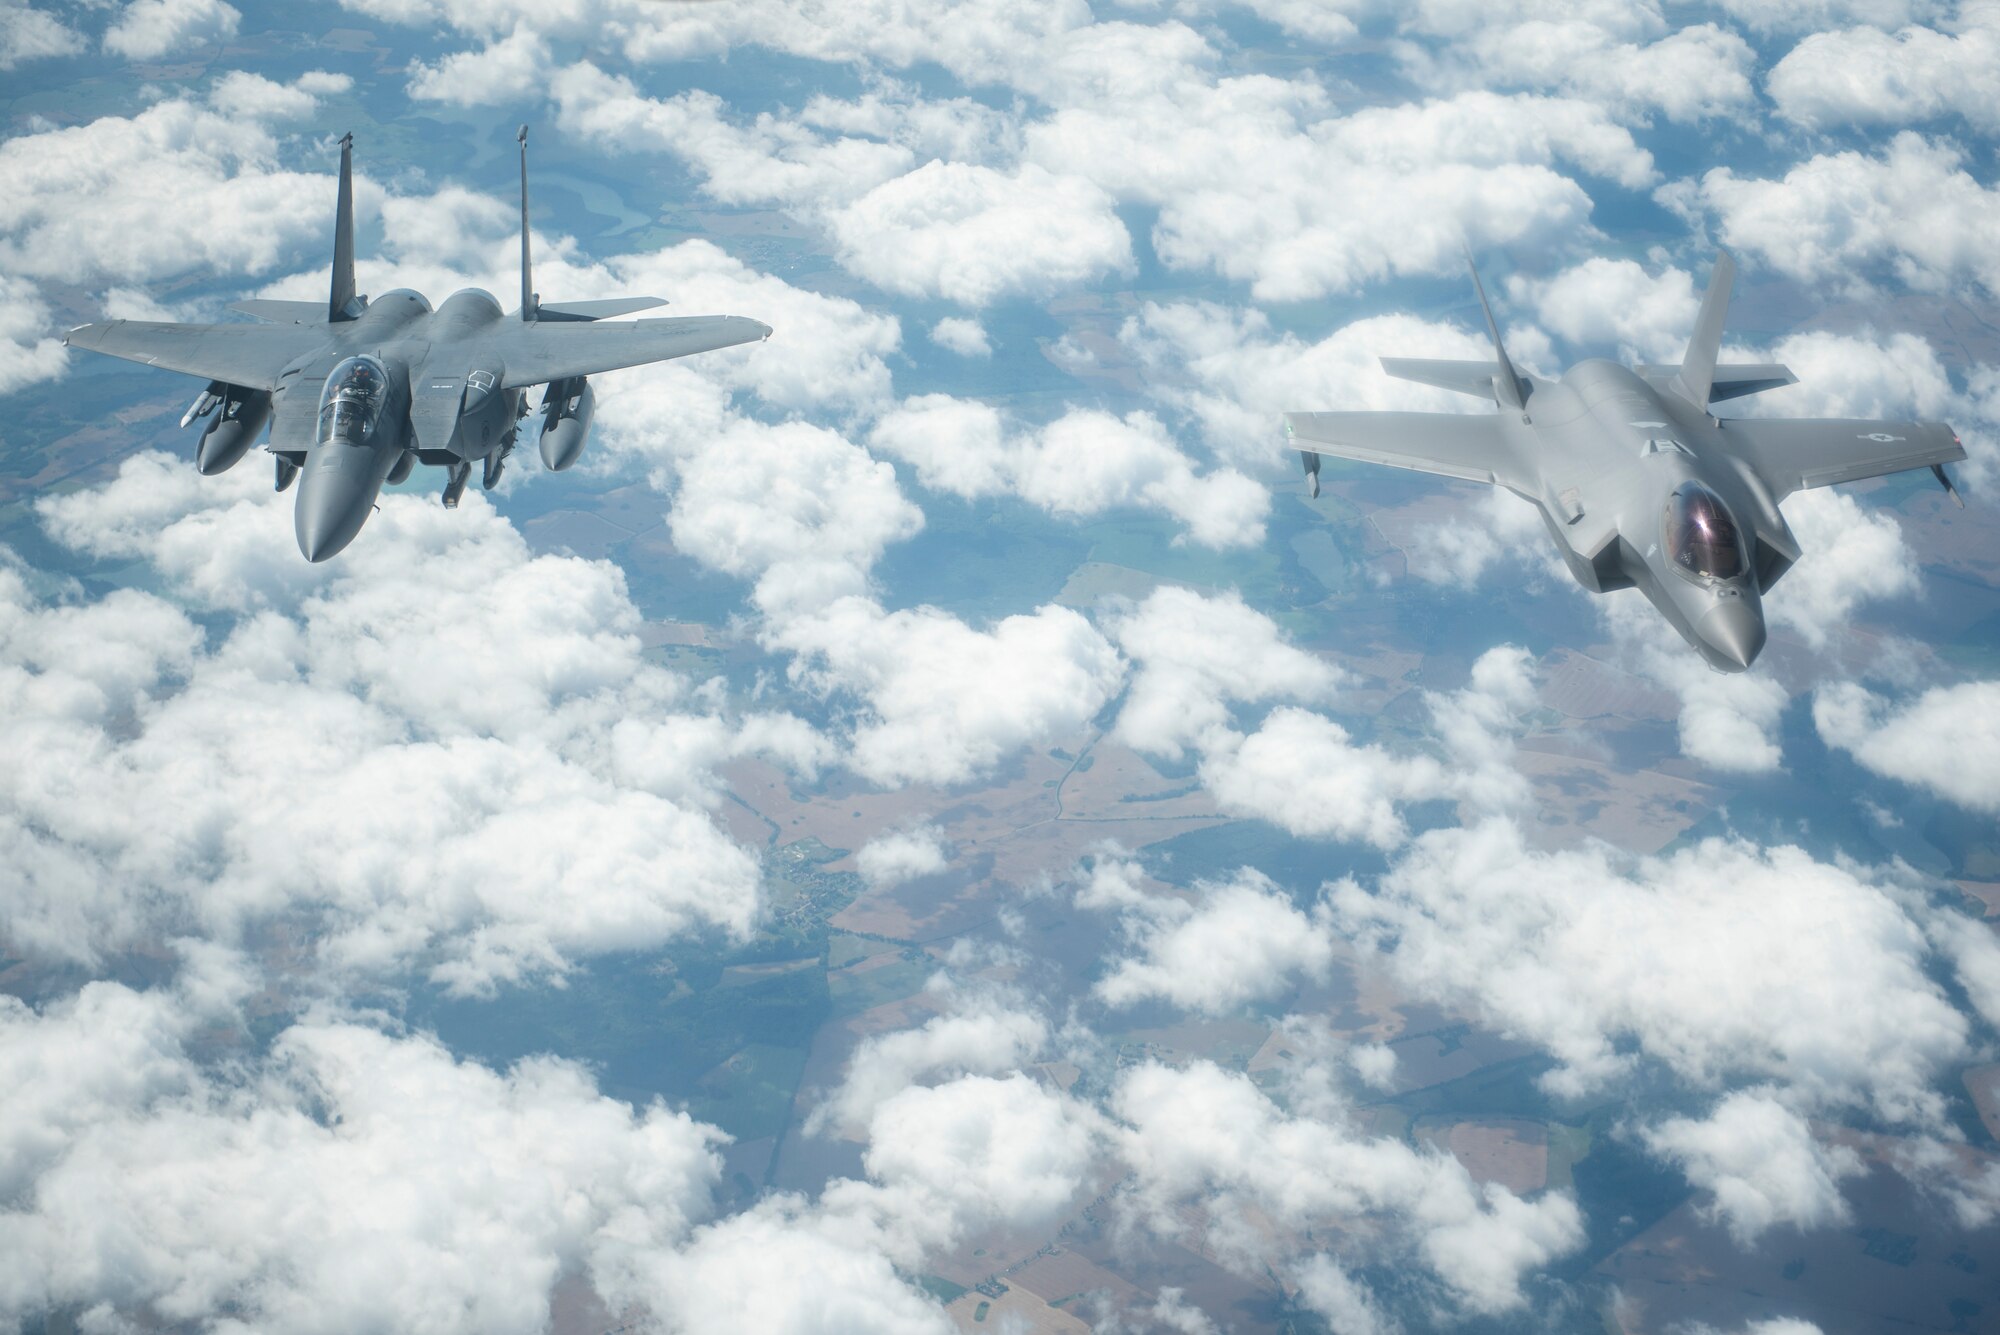 A U.S. Air Force F-15E Strike Eagle, assigned to the 4th Fighter Wing, Seymour Johnson Air Force Base, North Carolina, and a U.S. Air Force F-35A Lightning II assigned to the 388th Fighter Wing, Hill Air Force Base, Utah, fly side-by-side behind a KC-135 Stratotanker assigned to the 351st Air Refueling Squadron, RAF Mildenhall, England, during Operation Rapid Forge over Germany, July 23, 2019. Rapid Forge is a U.S. Air Forces in Europe-sponsored training event designed to enhance interoperability with NATO allies and partners, improve readiness and sharpen operational capabilities. (U.S. Air Force photo by Tech. Sgt. Emerson Nuñez)